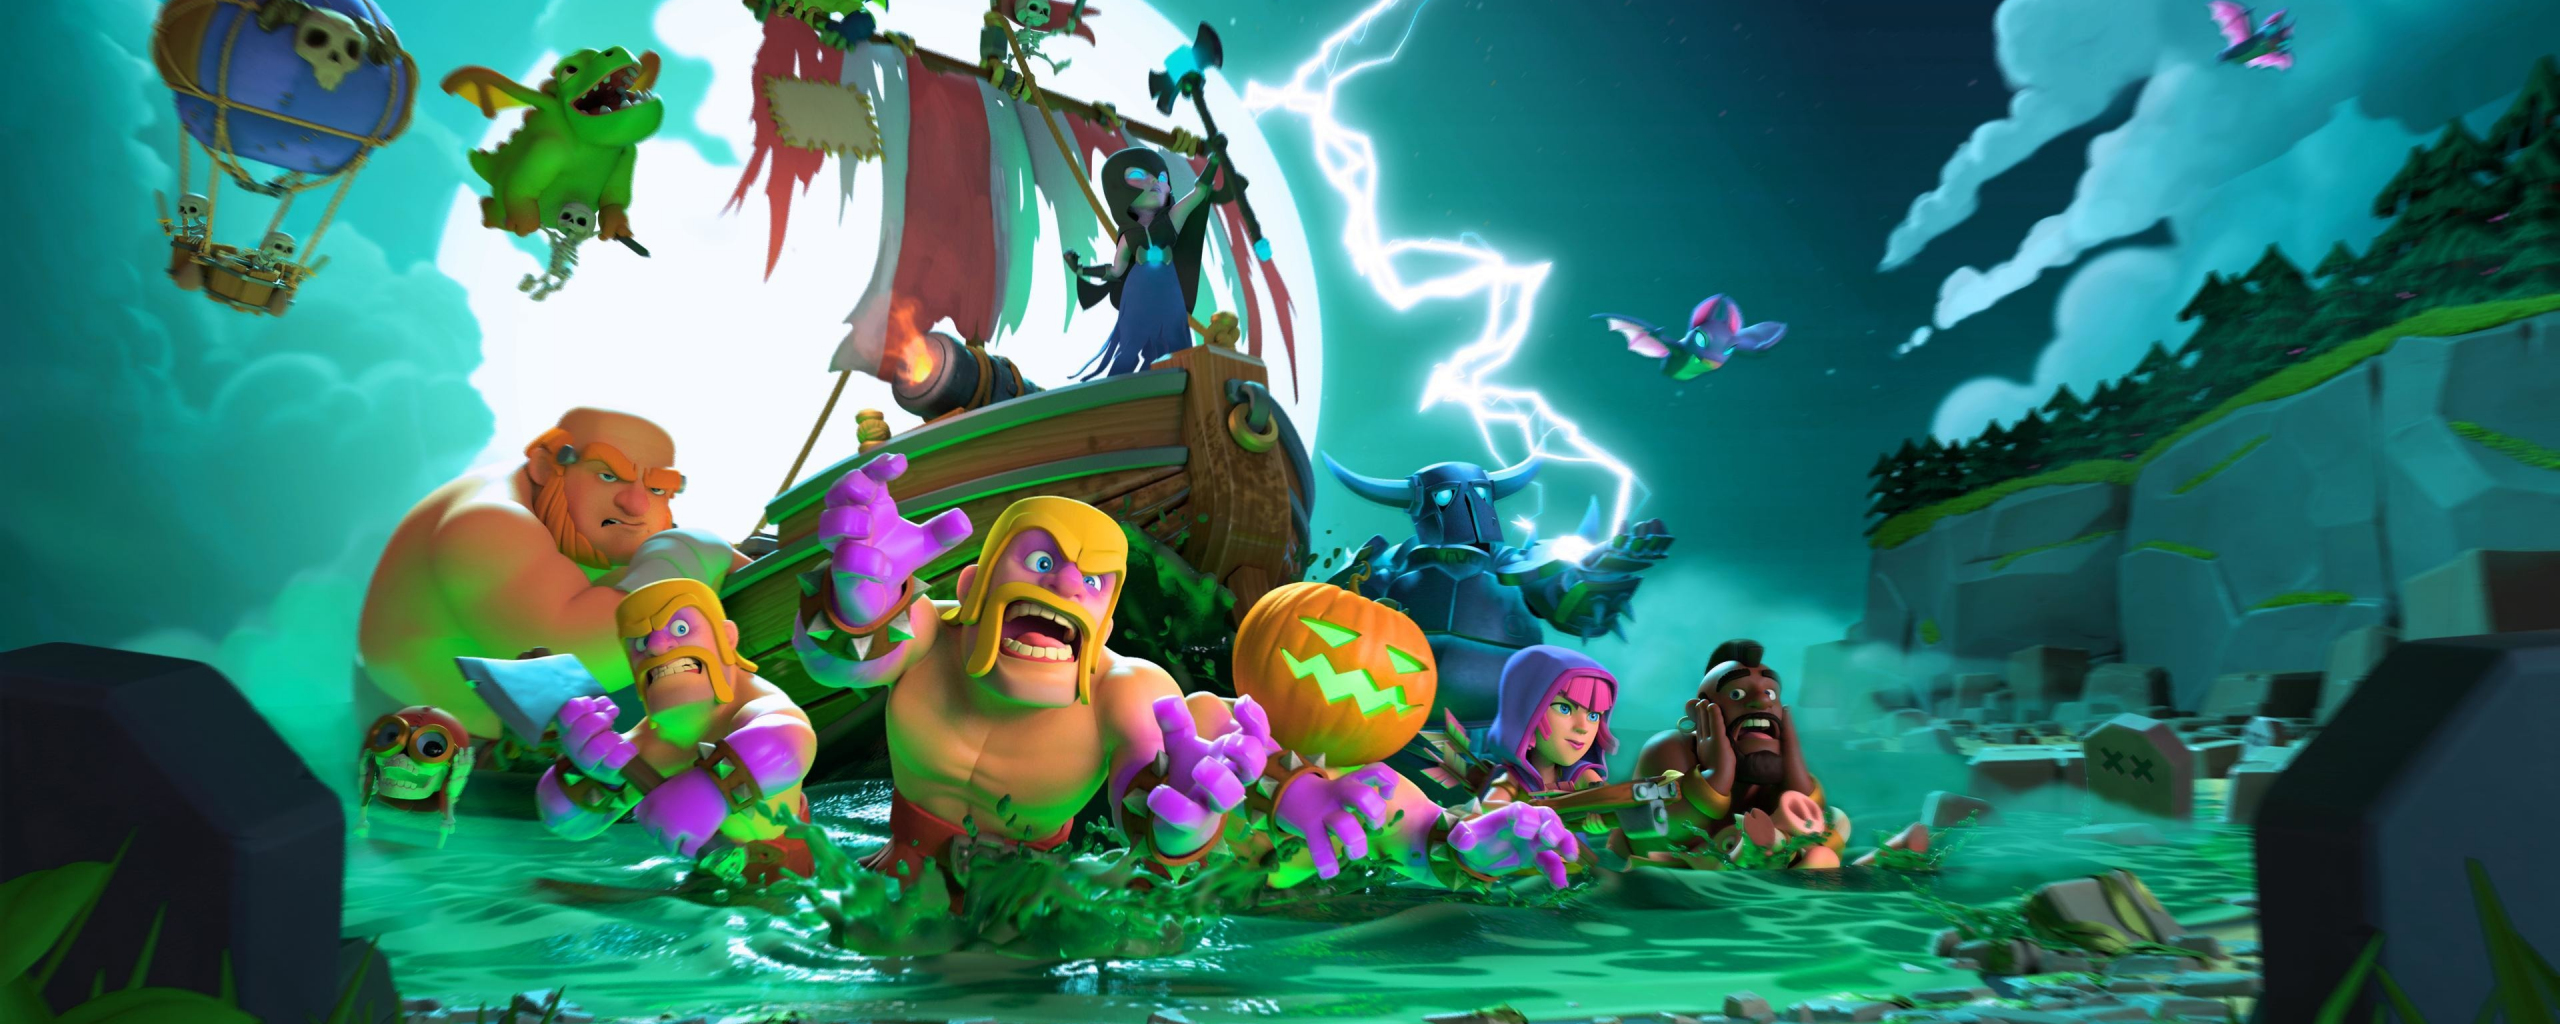 Download wallpaper 2560x1024 clash of clans, mobile game, halloween, dual  wide 21:9 2560x1024 hd background, 1340